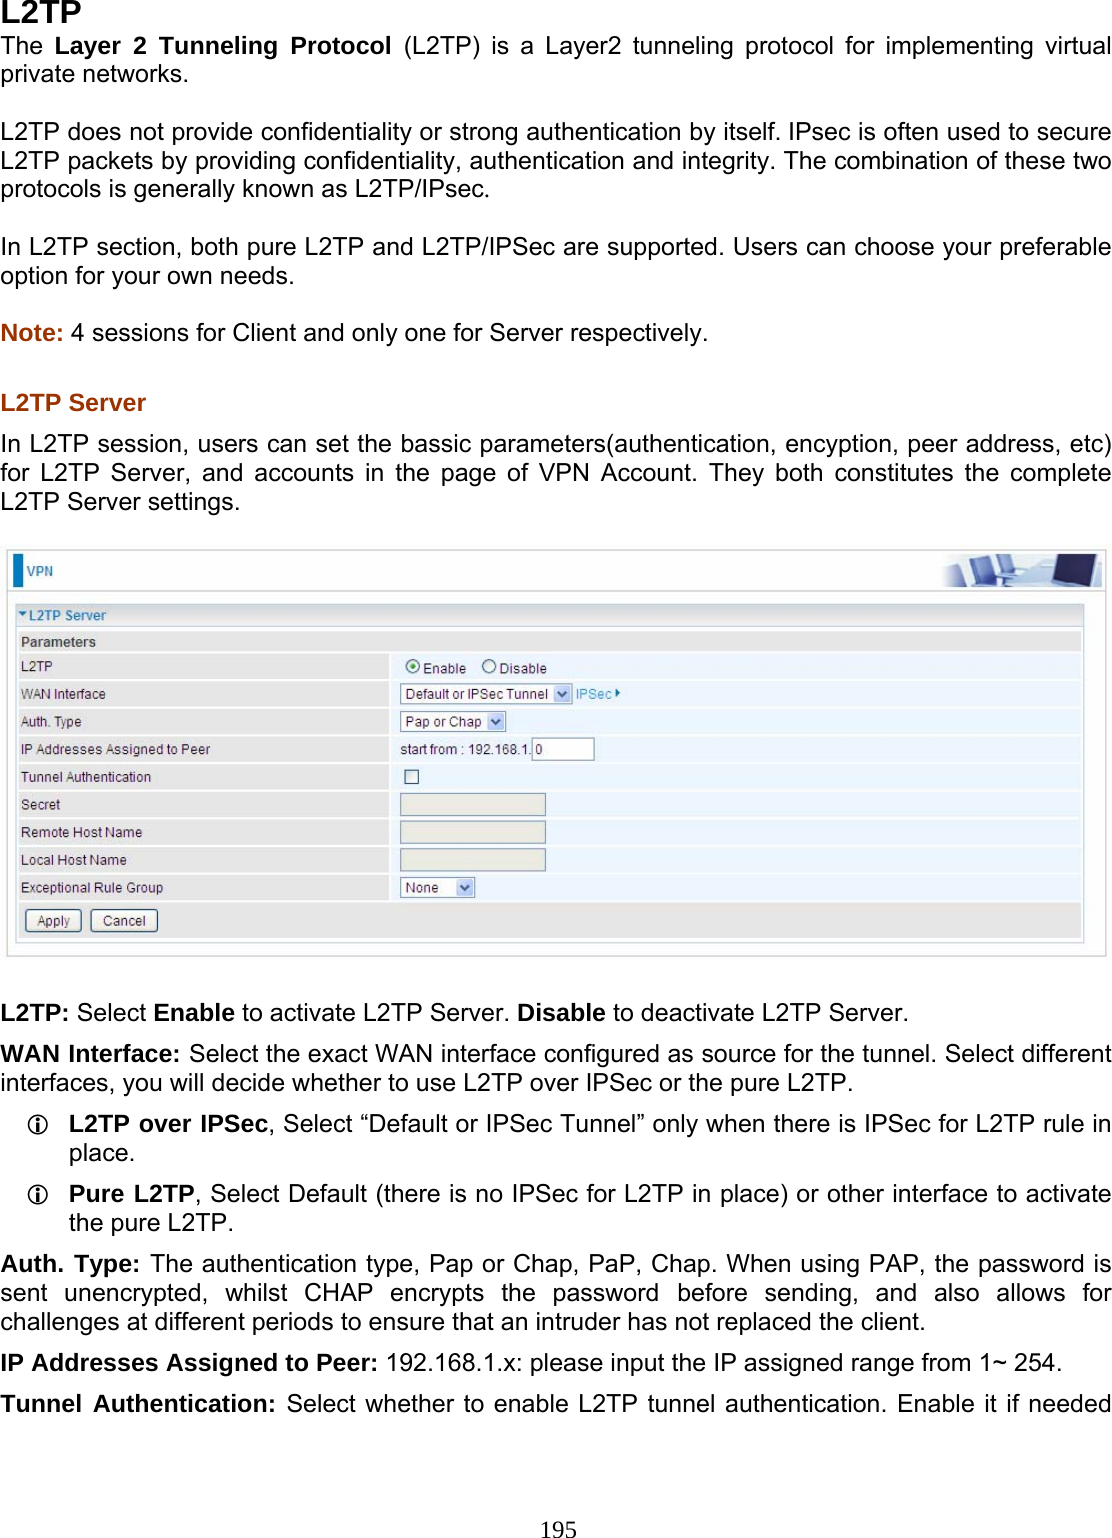 195 L2TP The  Layer 2 Tunneling Protocol (L2TP) is a Layer2 tunneling protocol for implementing virtual private networks.   L2TP does not provide confidentiality or strong authentication by itself. IPsec is often used to secure L2TP packets by providing confidentiality, authentication and integrity. The combination of these two protocols is generally known as L2TP/IPsec.   In L2TP section, both pure L2TP and L2TP/IPSec are supported. Users can choose your preferable option for your own needs.  Note: 4 sessions for Client and only one for Server respectively.   L2TP Server  In L2TP session, users can set the bassic parameters(authentication, encyption, peer address, etc) for L2TP Server, and accounts in the page of VPN Account. They both constitutes the complete L2TP Server settings.    L2TP: Select Enable to activate L2TP Server. Disable to deactivate L2TP Server. WAN Interface: Select the exact WAN interface configured as source for the tunnel. Select different interfaces, you will decide whether to use L2TP over IPSec or the pure L2TP.  L2TP over IPSec, Select “Default or IPSec Tunnel” only when there is IPSec for L2TP rule in place.  Pure L2TP, Select Default (there is no IPSec for L2TP in place) or other interface to activate the pure L2TP. Auth. Type: The authentication type, Pap or Chap, PaP, Chap. When using PAP, the password is sent unencrypted, whilst CHAP encrypts the password before sending, and also allows for challenges at different periods to ensure that an intruder has not replaced the client. IP Addresses Assigned to Peer: 192.168.1.x: please input the IP assigned range from 1~ 254.  Tunnel Authentication: Select whether to enable L2TP tunnel authentication. Enable it if needed 